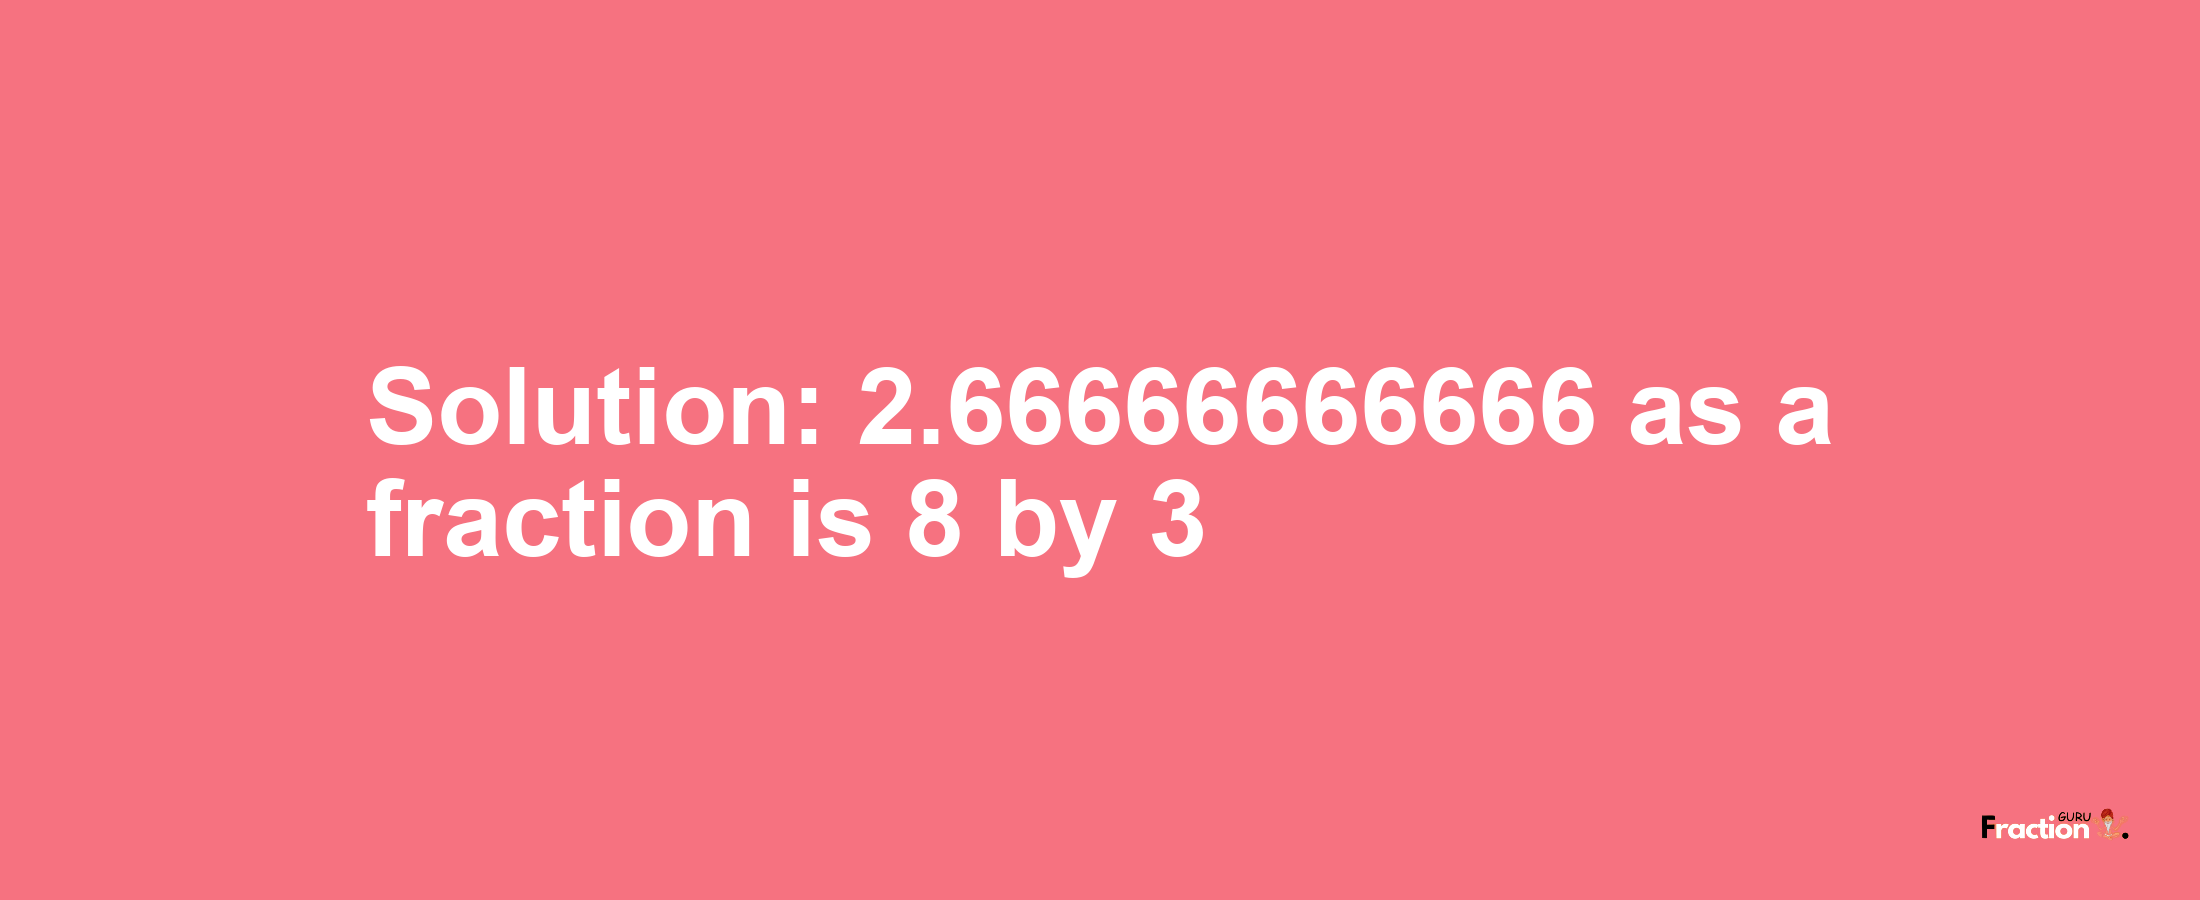 Solution:2.66666666666 as a fraction is 8/3